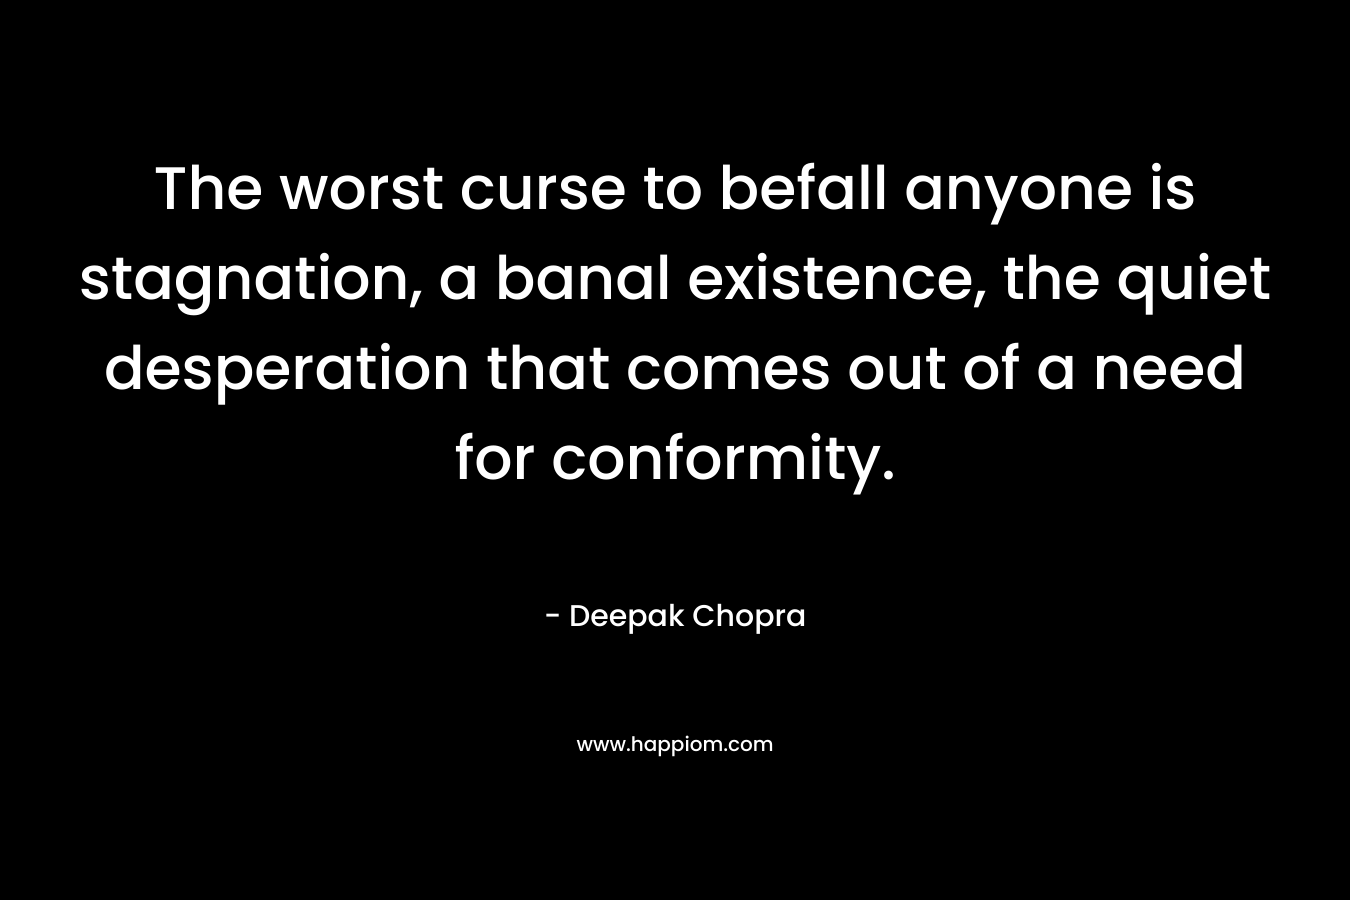 The worst curse to befall anyone is stagnation, a banal existence, the quiet desperation that comes out of a need for conformity.  – Deepak Chopra